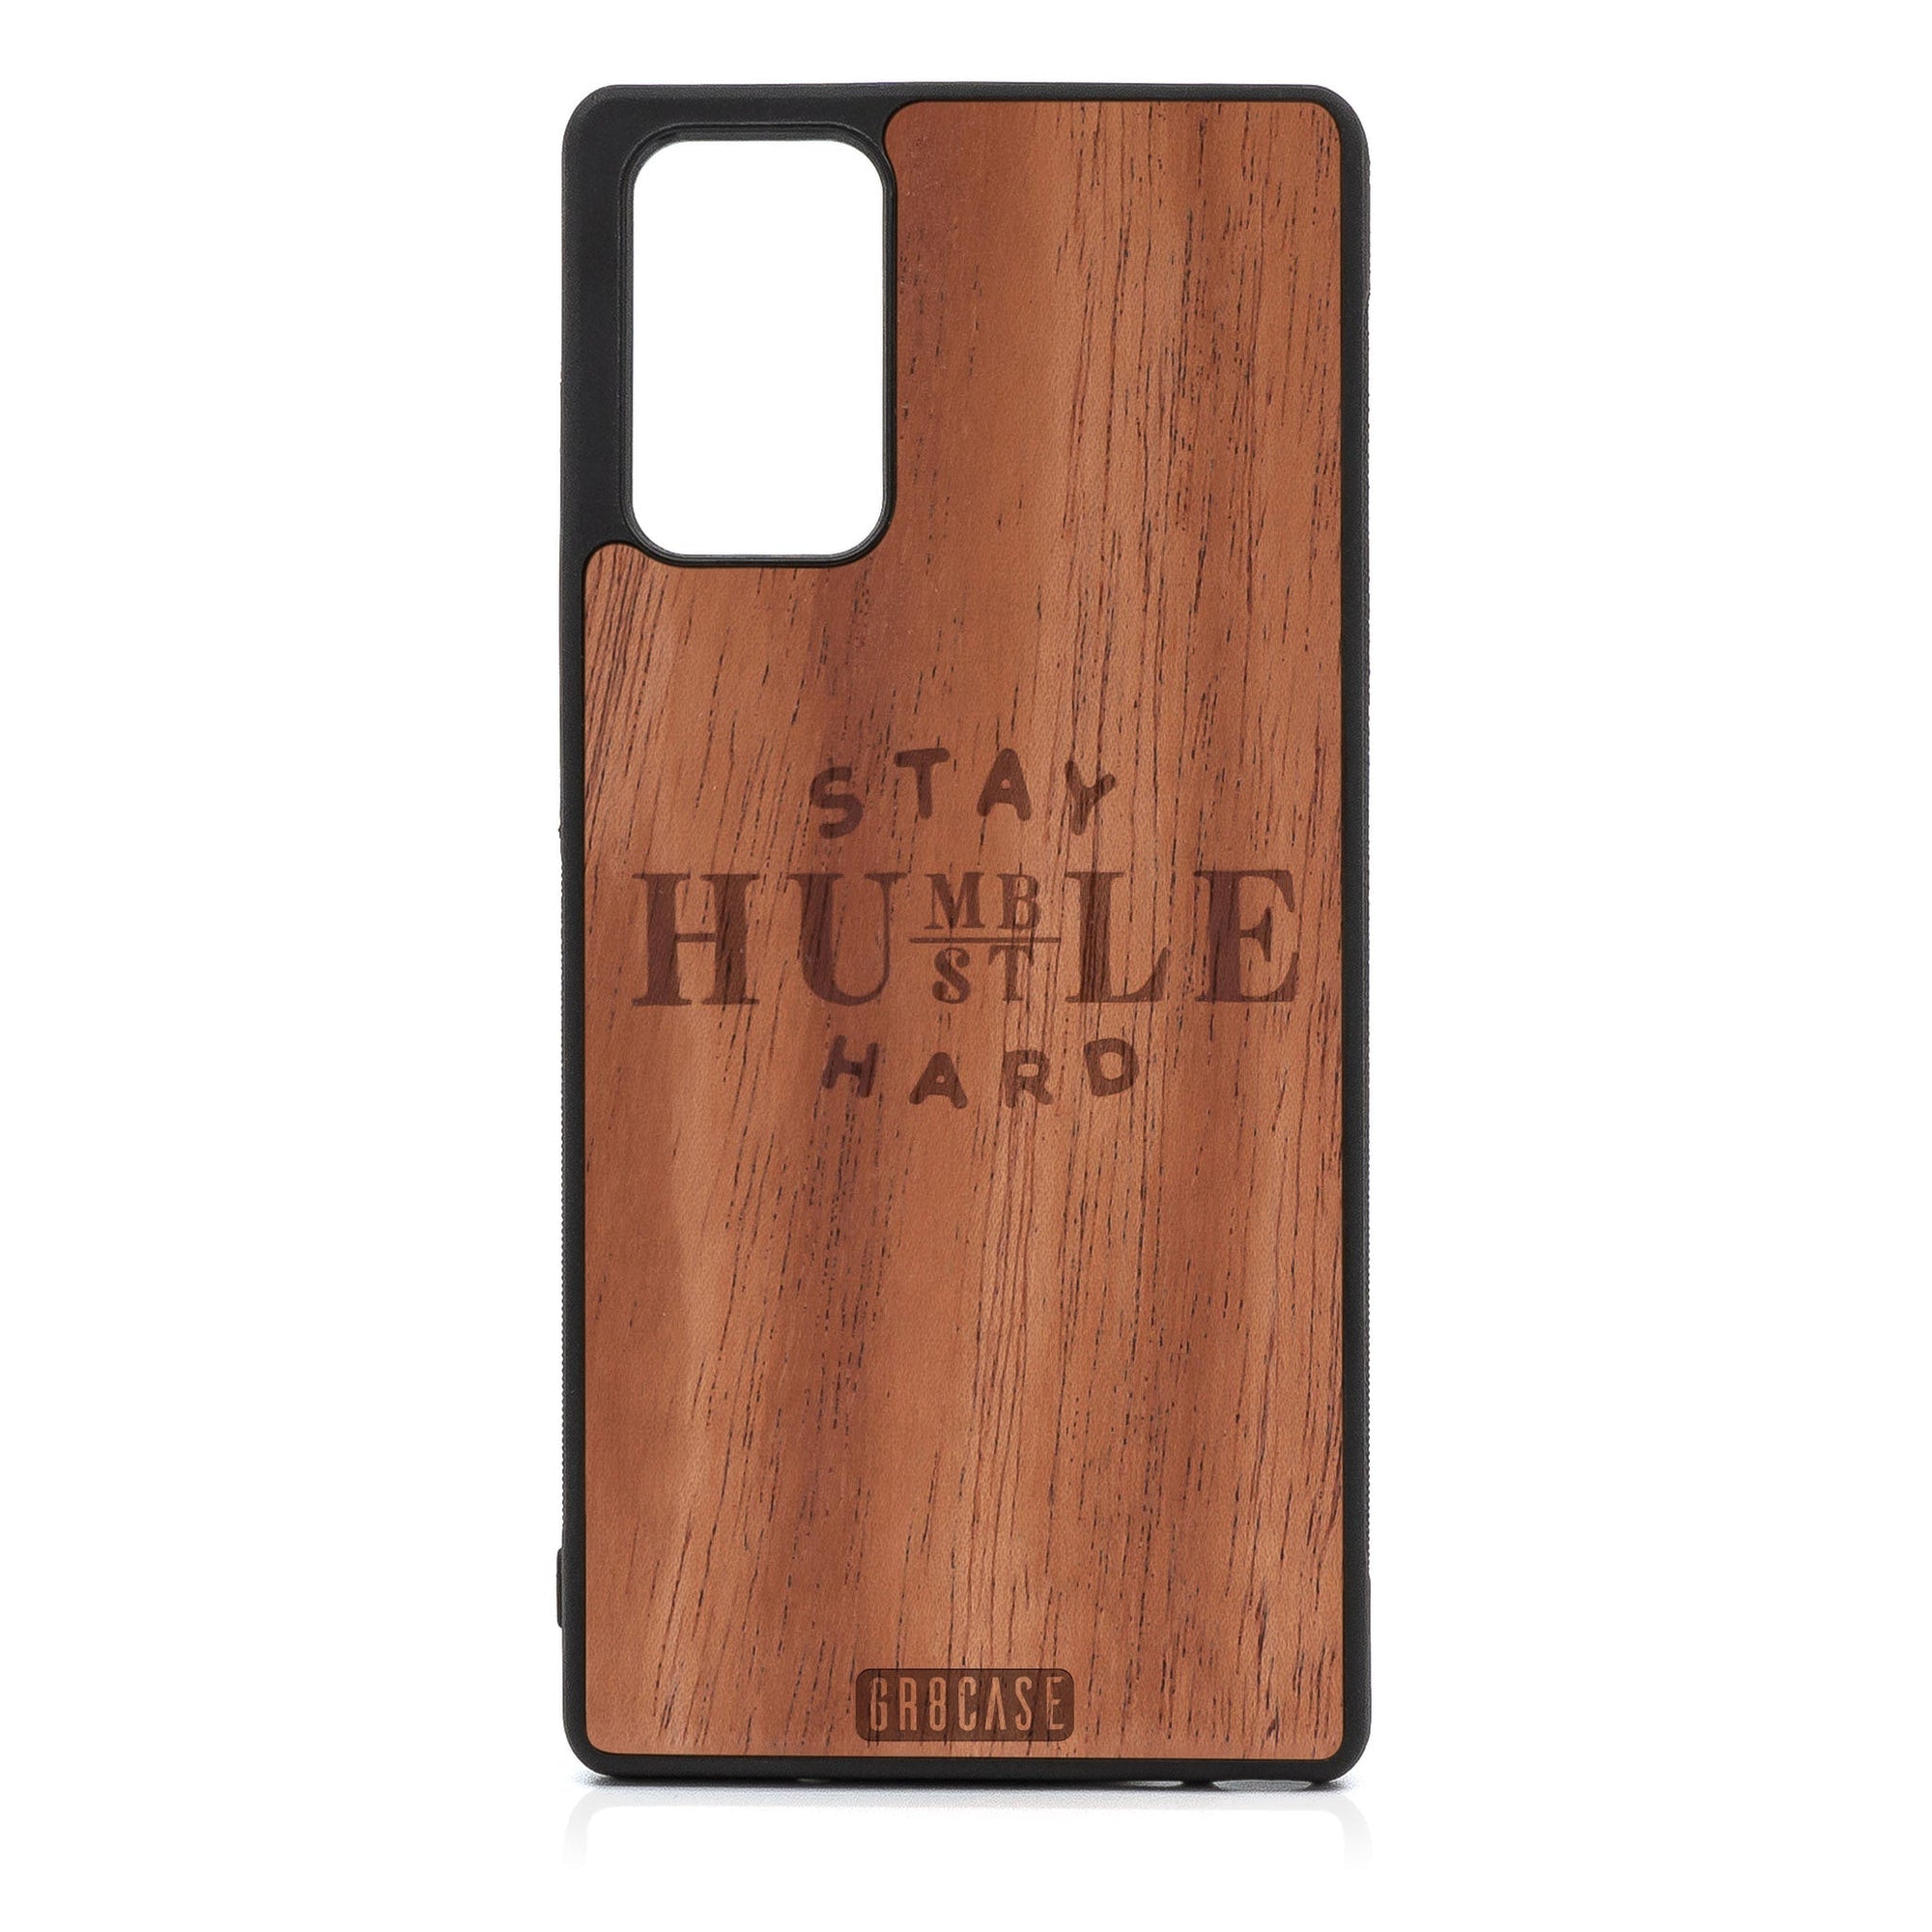 Stay Humble Hustle Hard Design Wood Case For Samsung Galaxy A53 5G